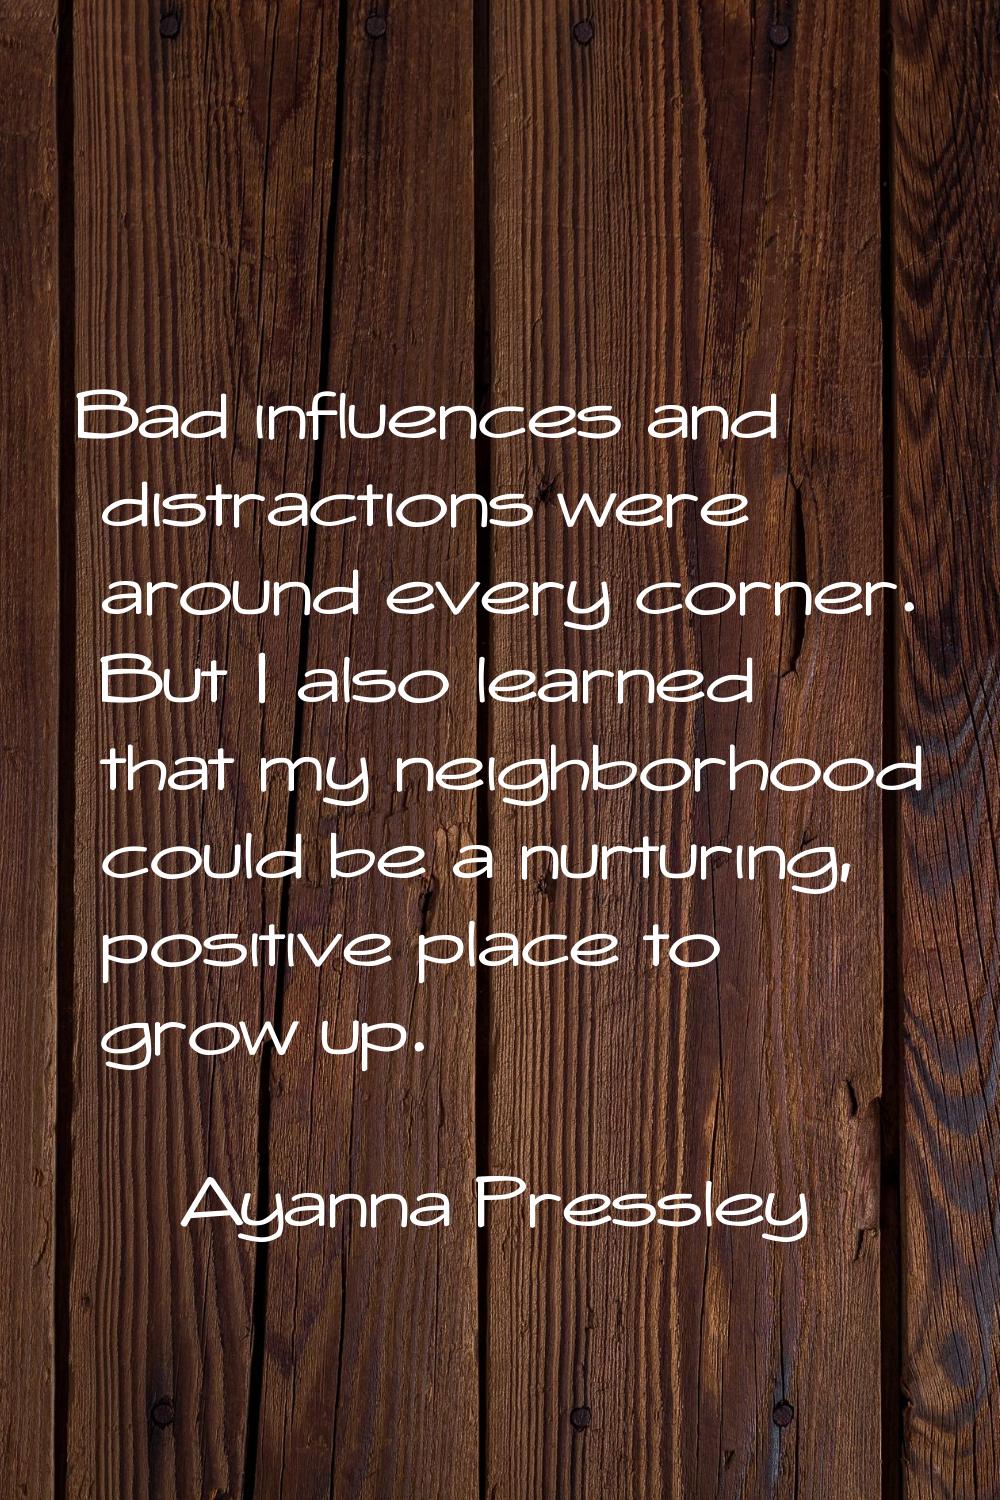 Bad influences and distractions were around every corner. But I also learned that my neighborhood c